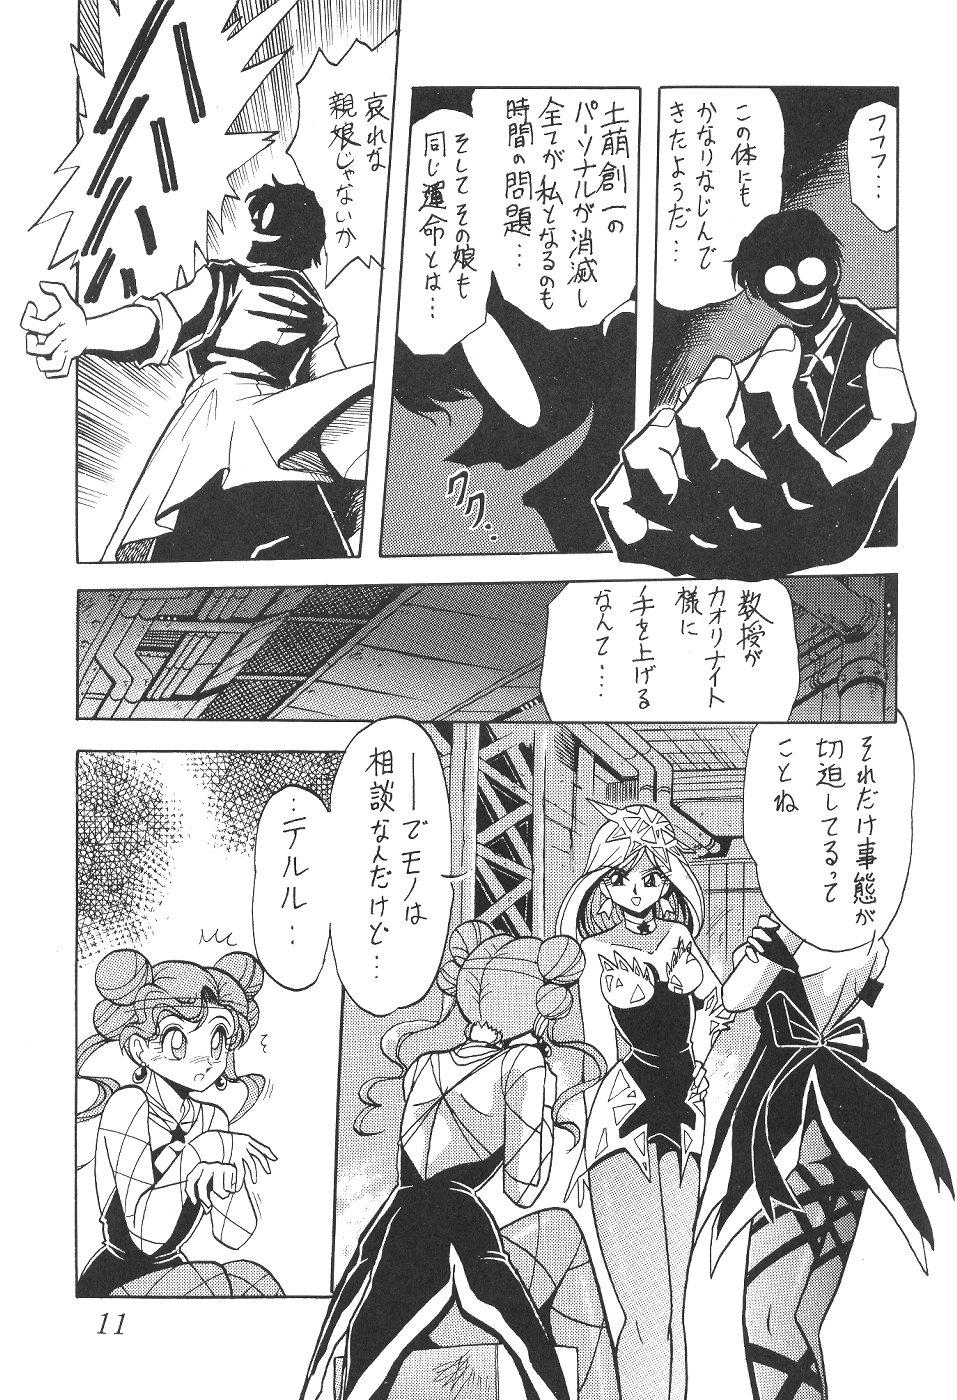 Stockings Silent Saturn 4 - Sailor moon Toes - Page 11